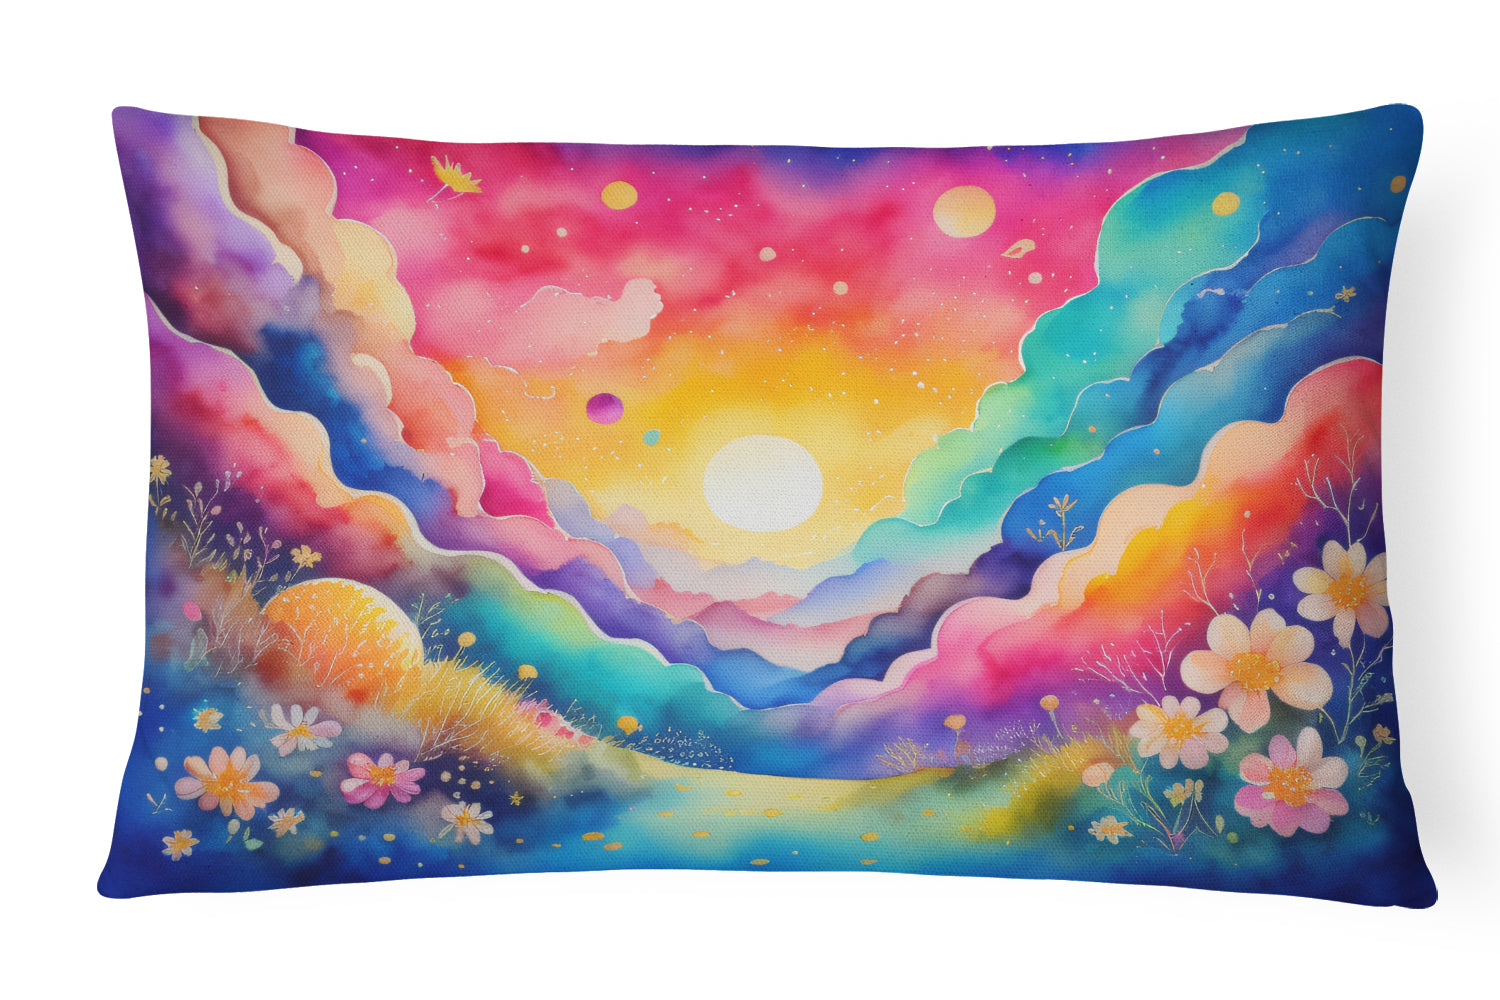 Buy this Stock, or Gillyflower in Color Fabric Decorative Pillow